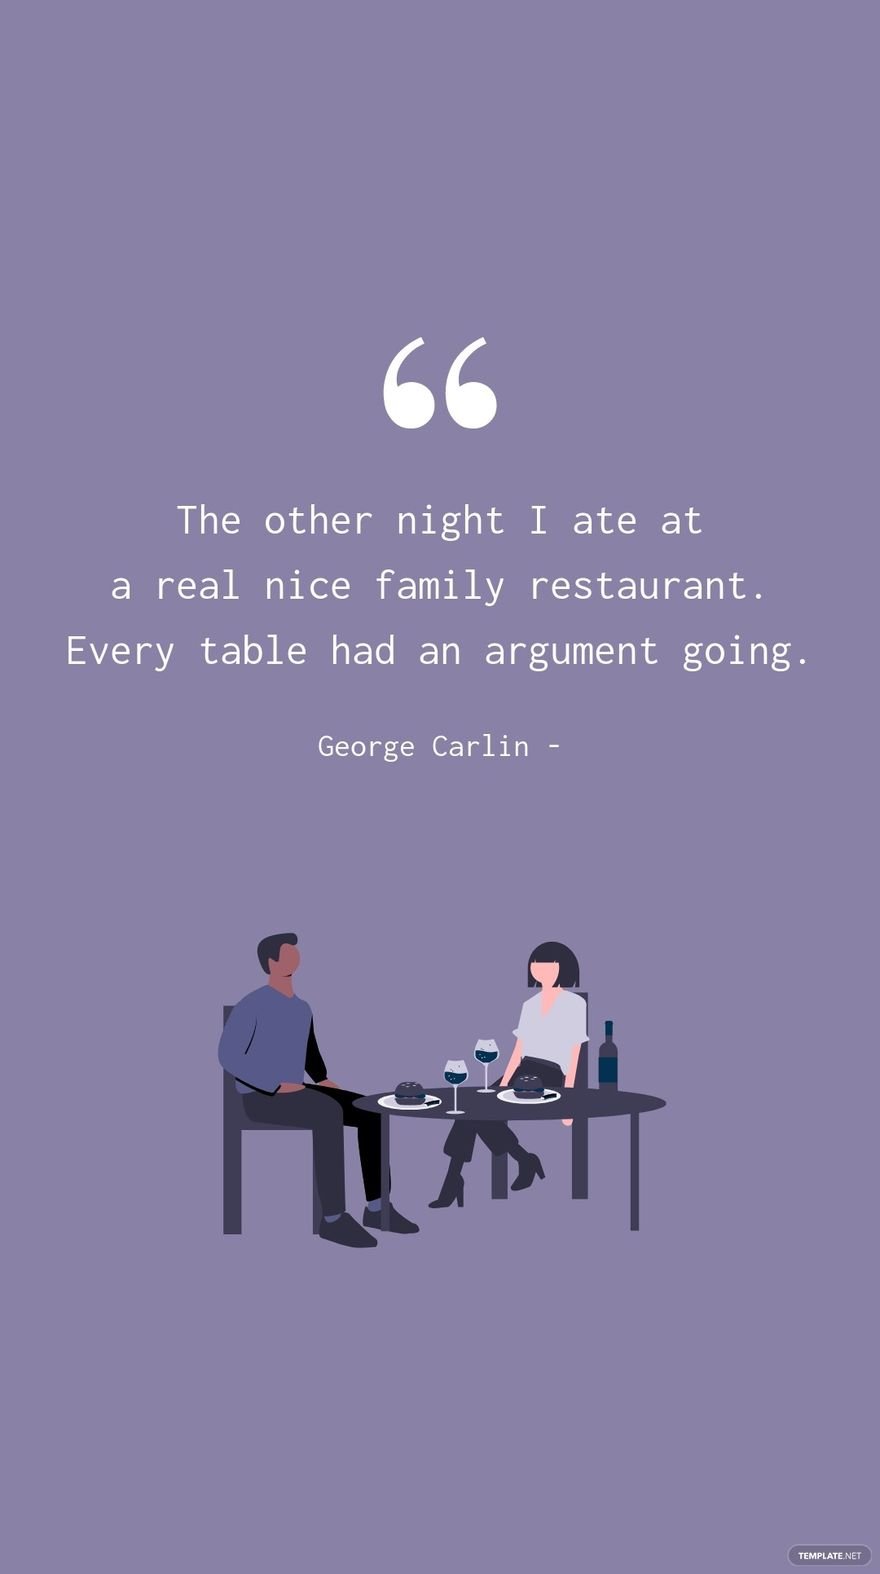 George Carlin - The other night I ate at a real nice family restaurant. Every table had an argument going.